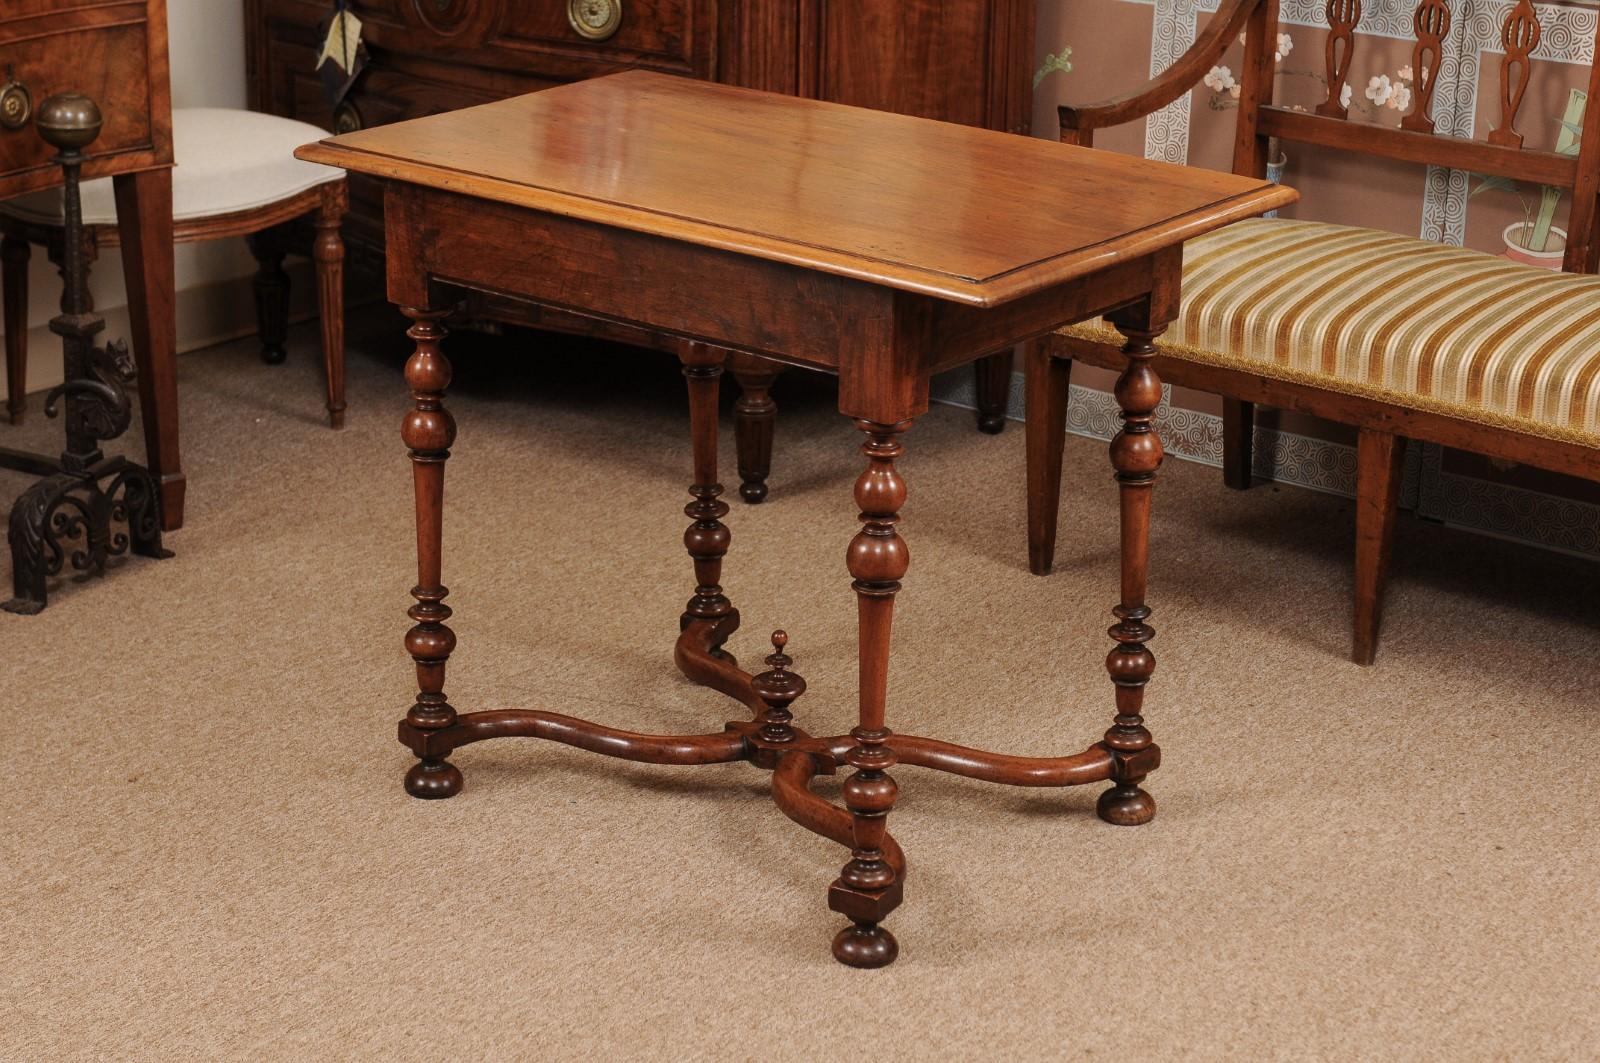 18th Century English Walnut Side Table with Drawer, Turned Legs & X-Stretcher 5